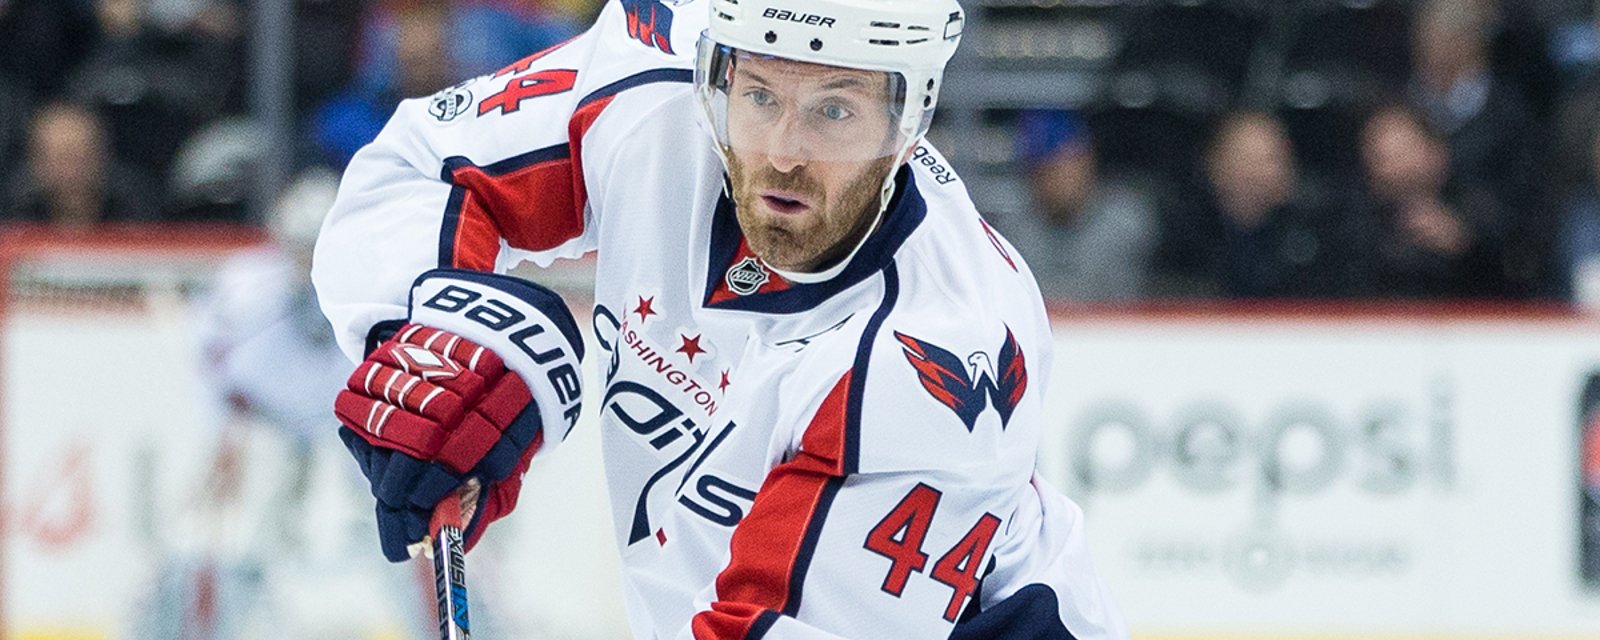 Report: Awful news for Caps blueliner Orpik